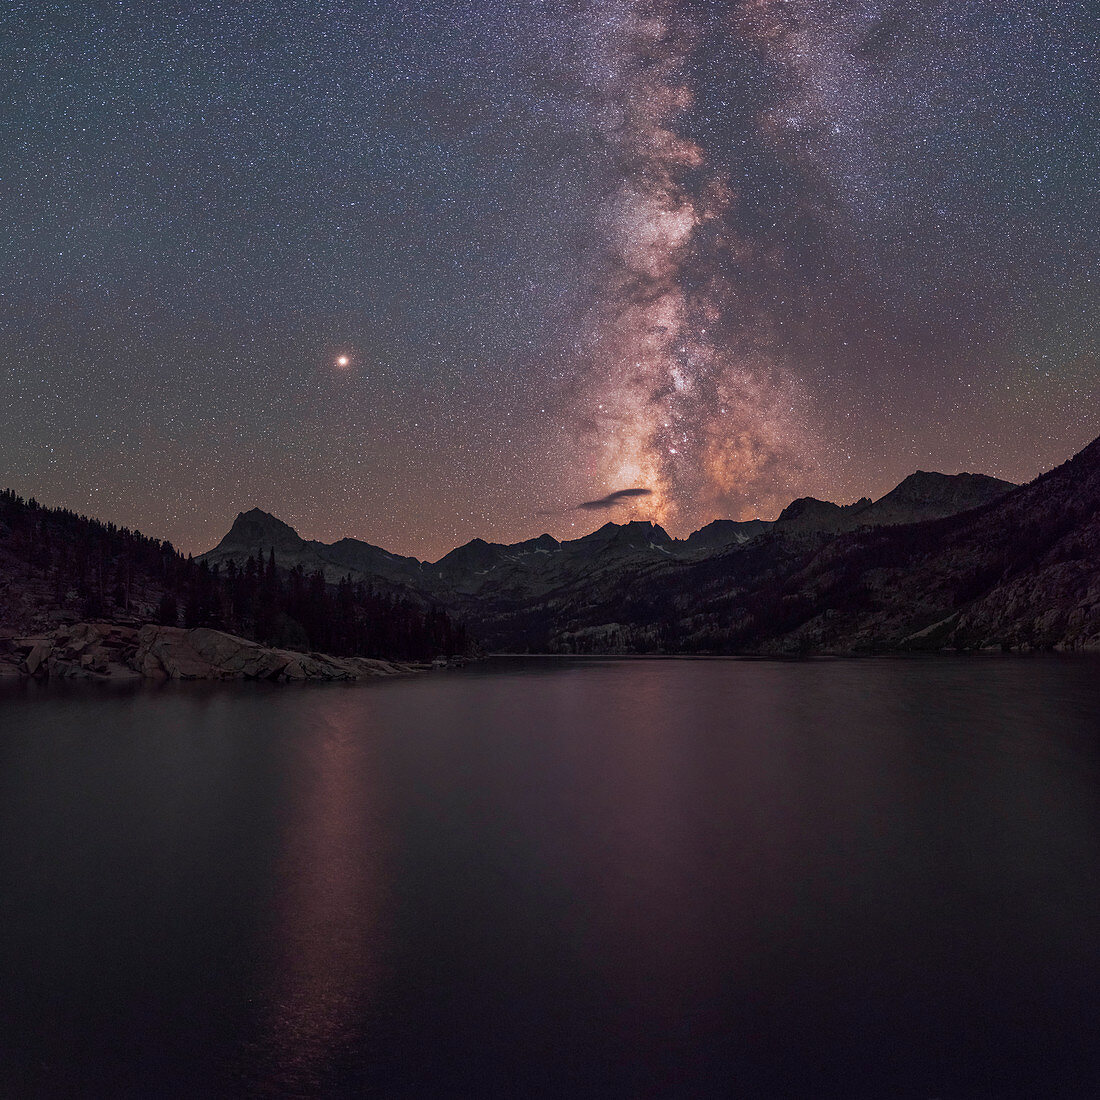 Milky Way and Mars over a mountain lake